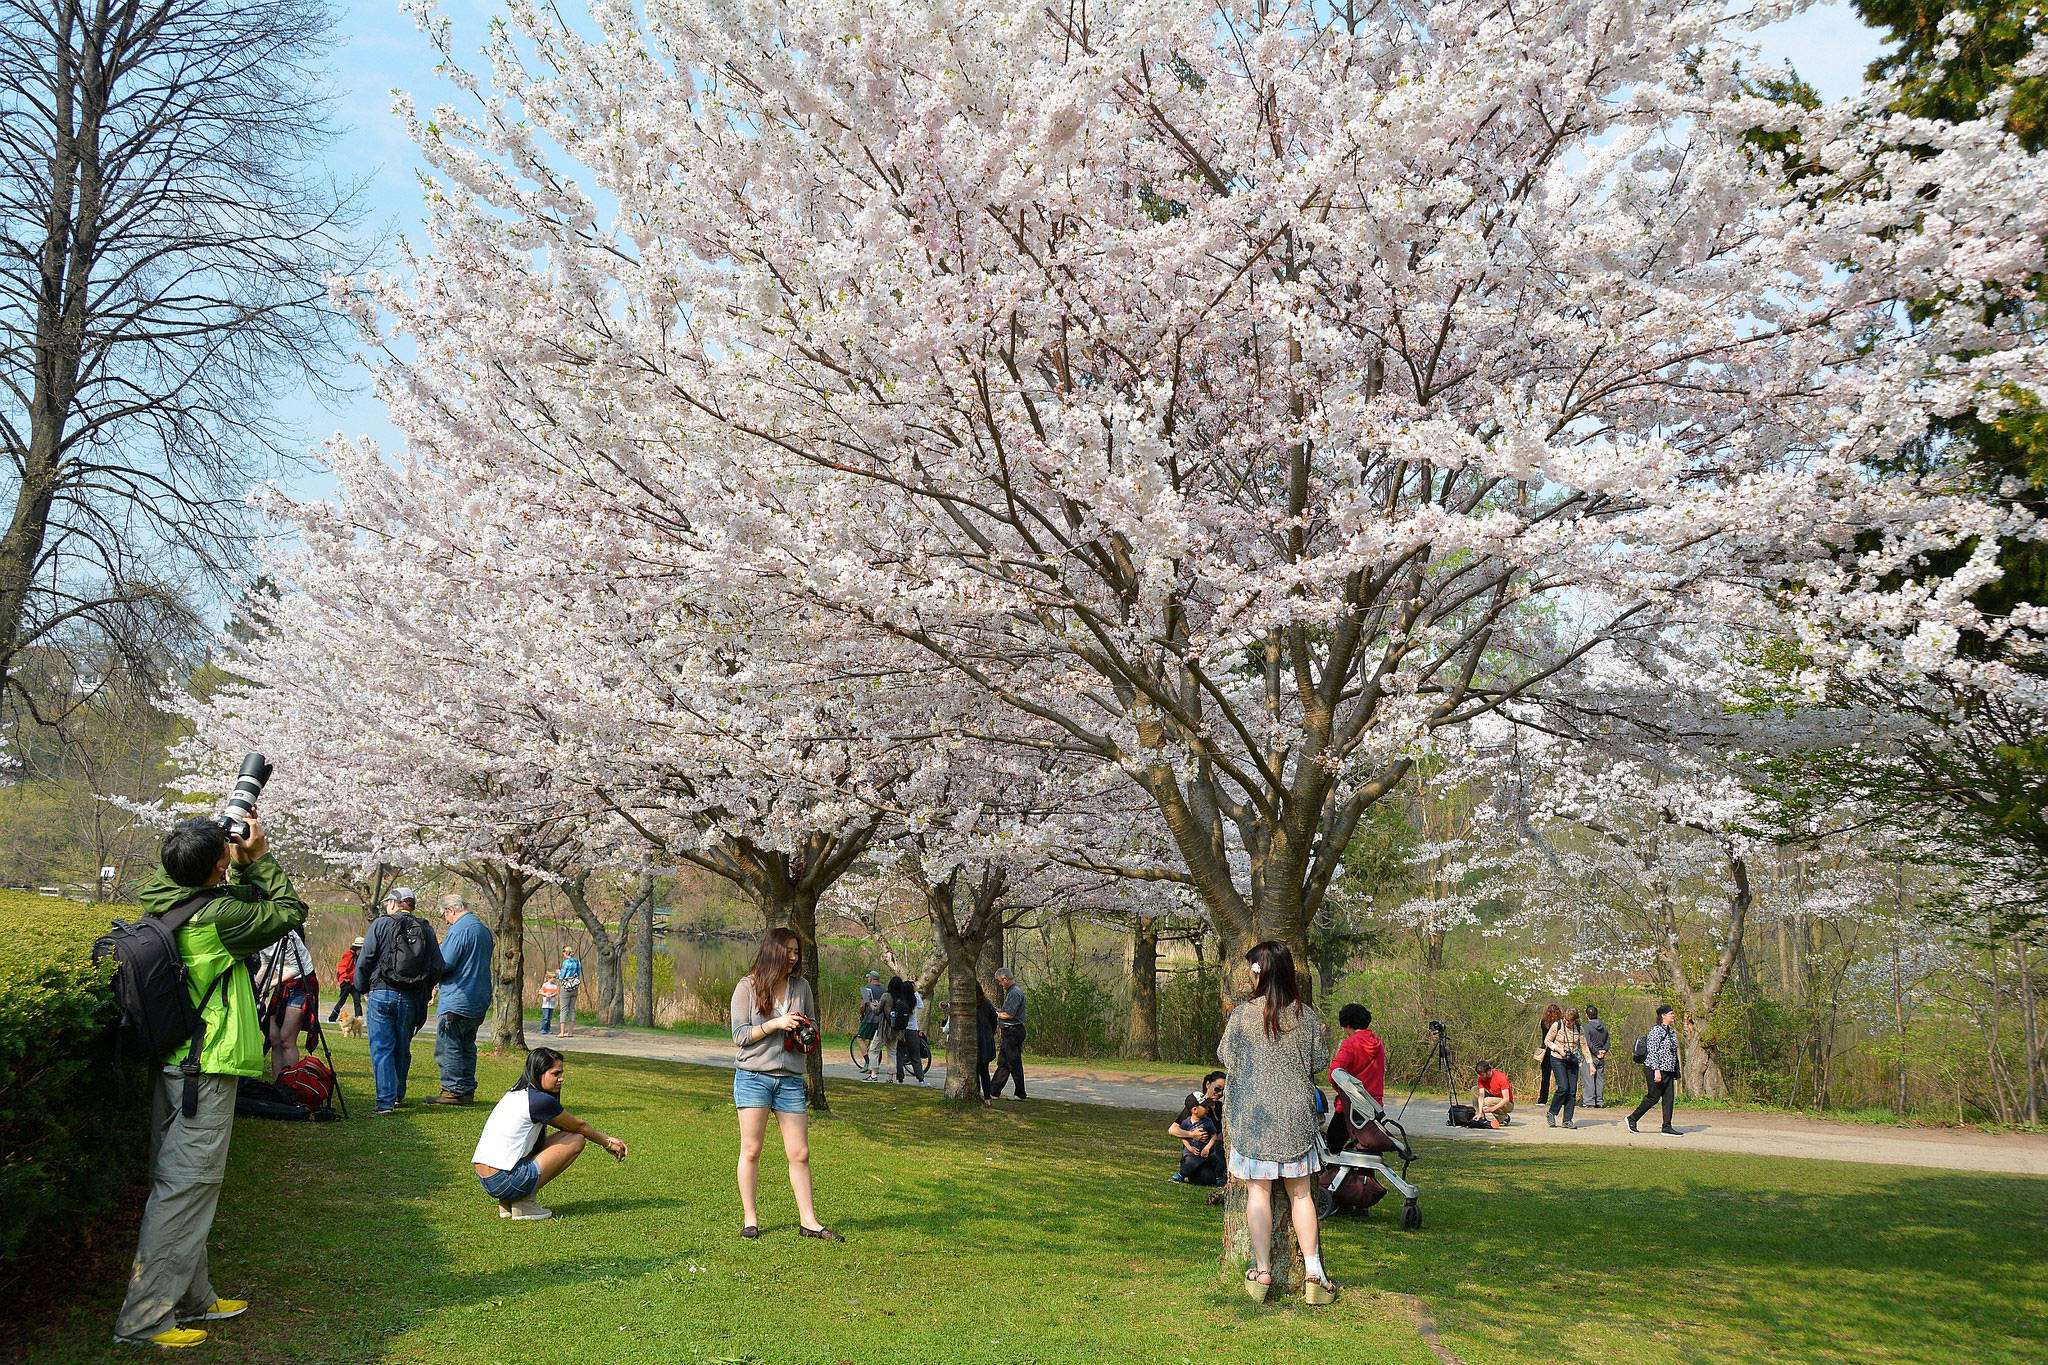 50 things to do this spring in Toronto